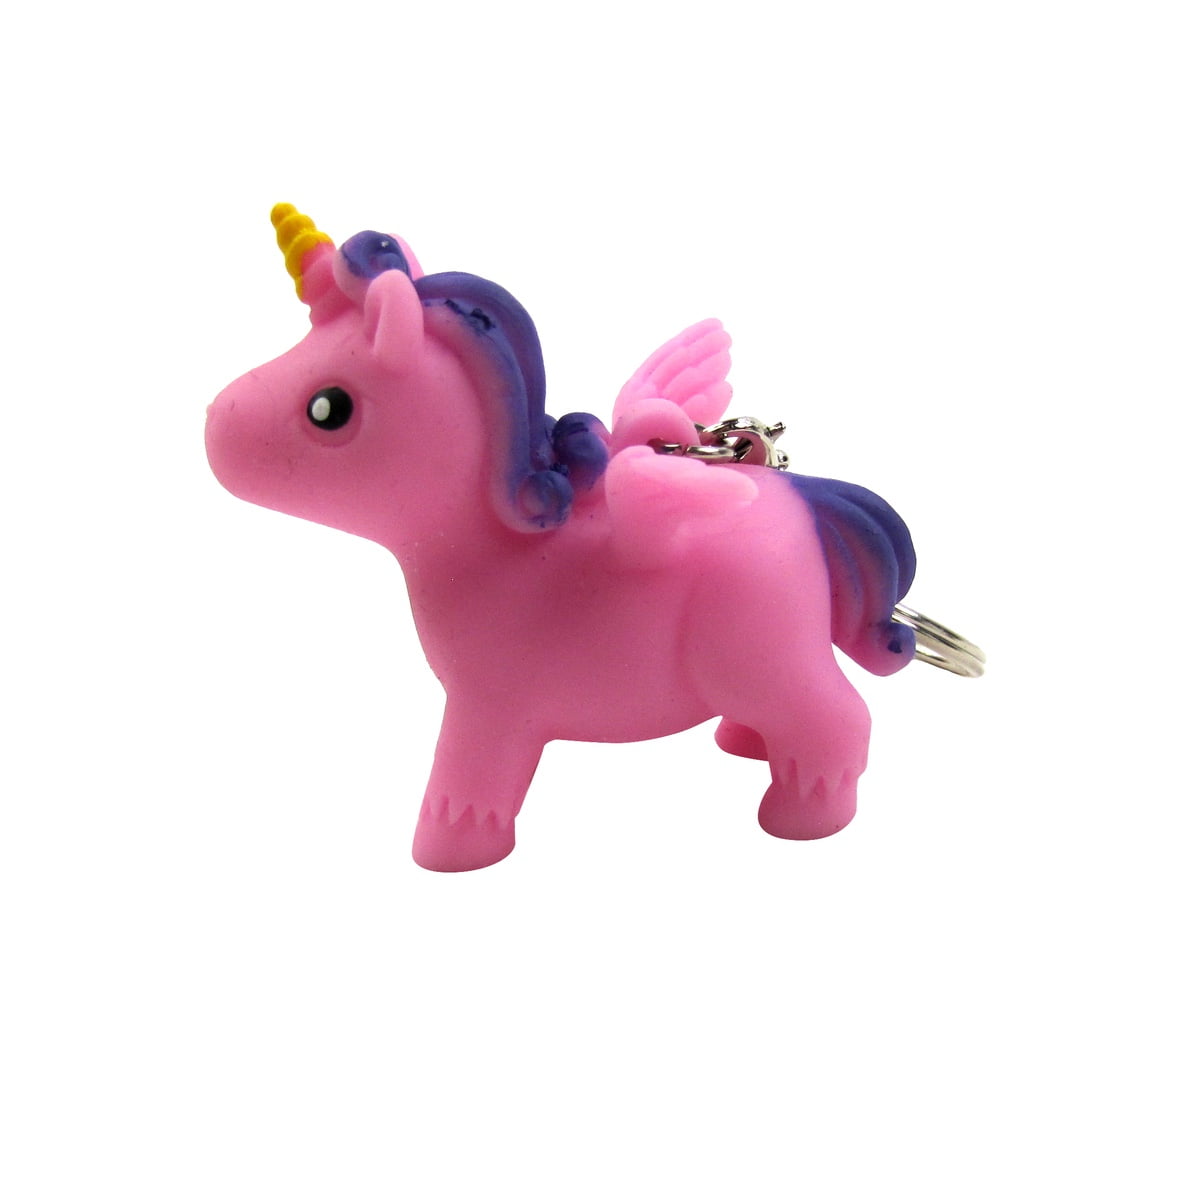 Novelty Squeeze And Poop Unicorn Key Chain Joke Gag Gift Prank Choose Your Color 